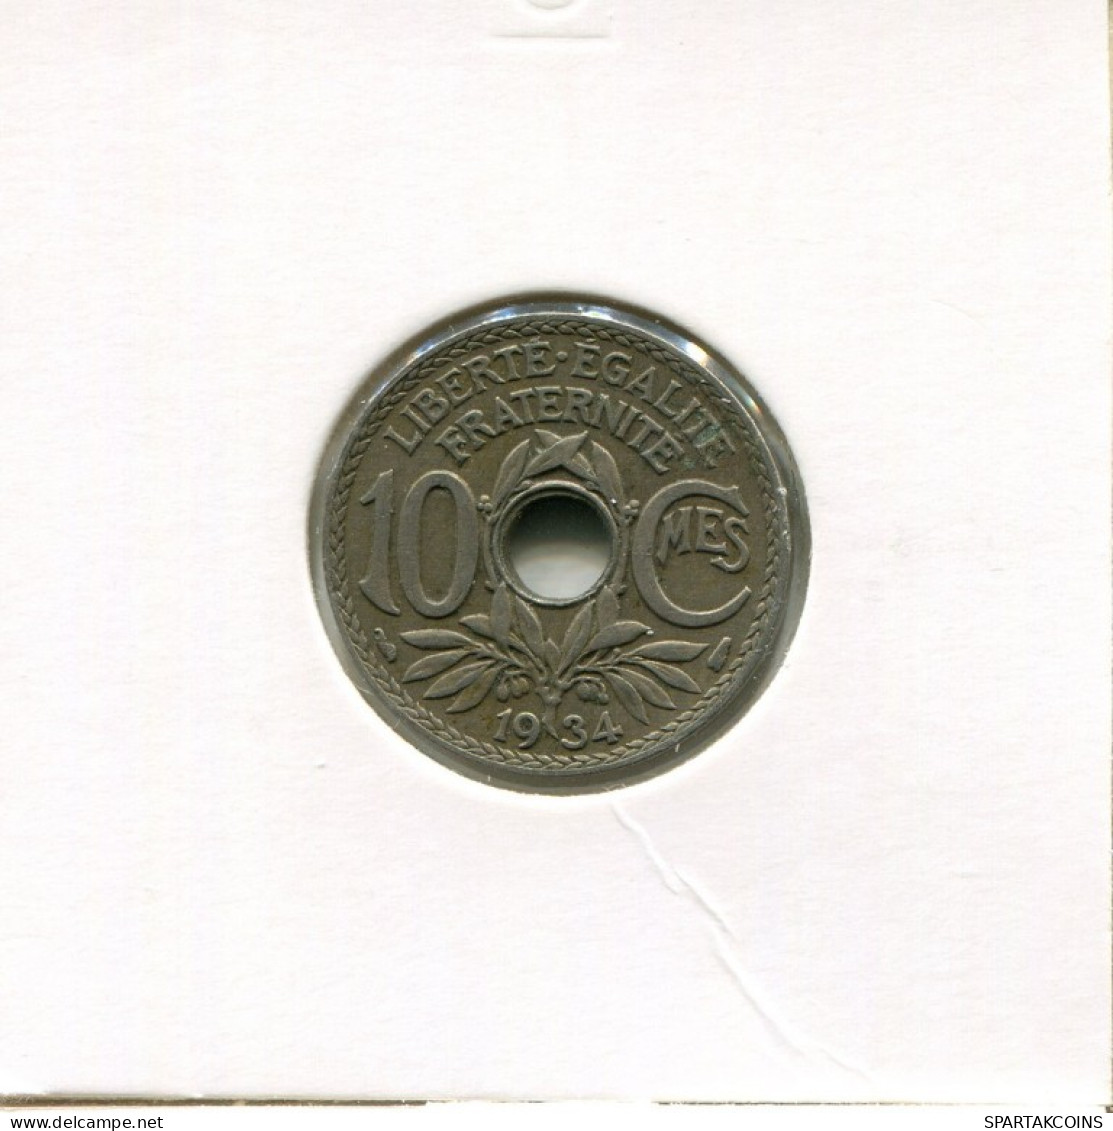 10 CENTIMES 1934 FRANCE Coin French Coin #AK802.U.A - 10 Centimes